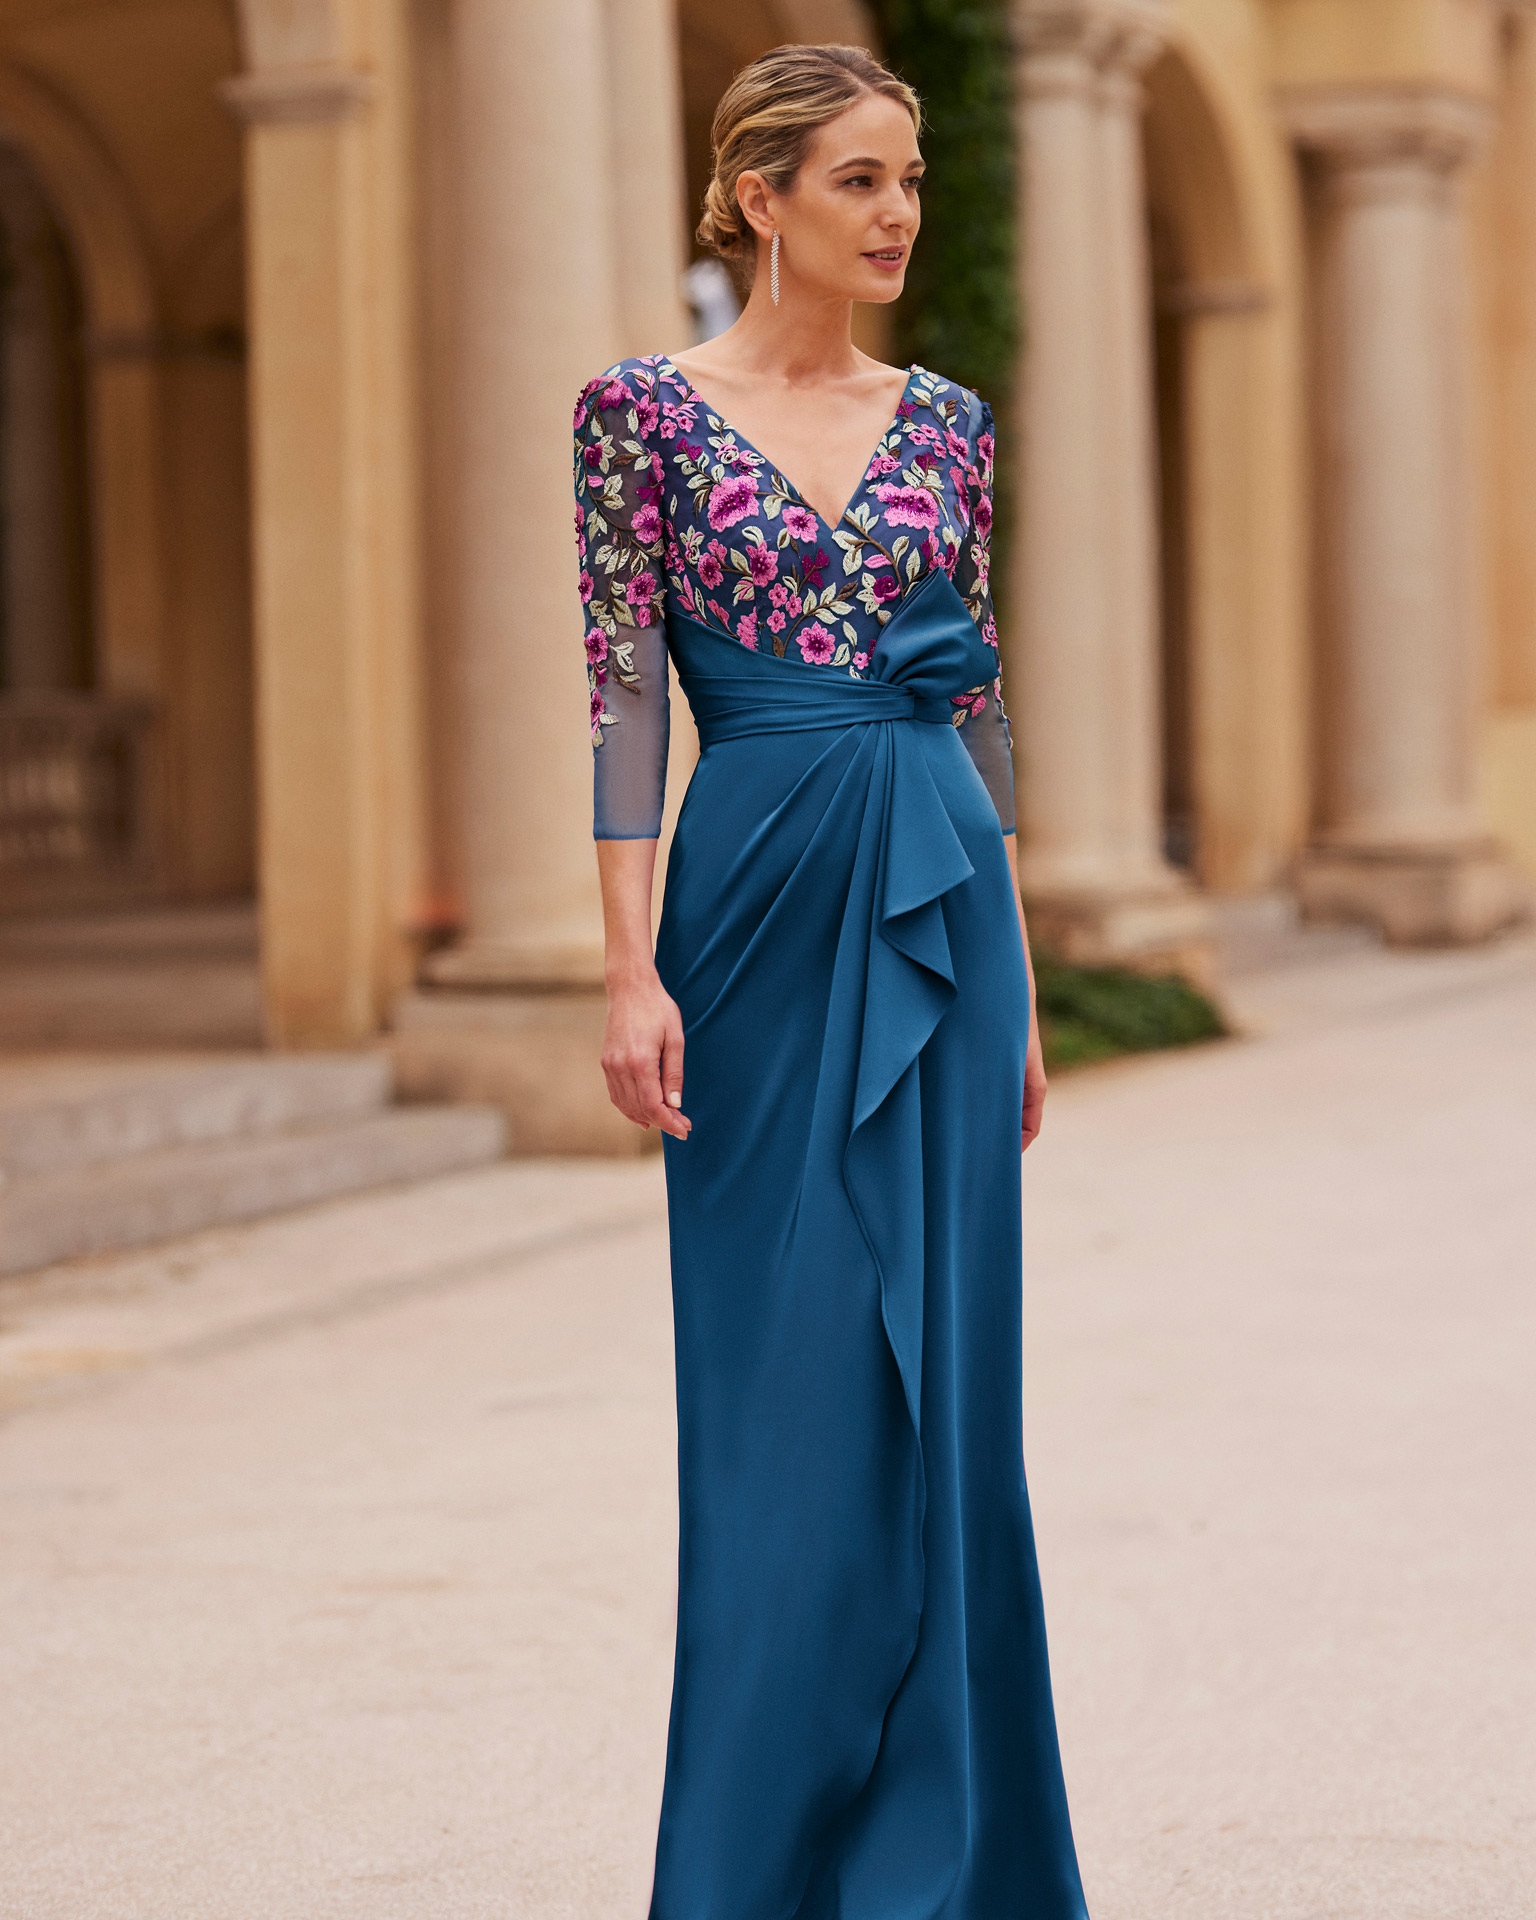 Flowing long evening dress. Crafted with sateen crêpe and beadwork lace. With V-neckline and three-quarter sleeve. Couture Club look. MARFIL_BARCELONA.